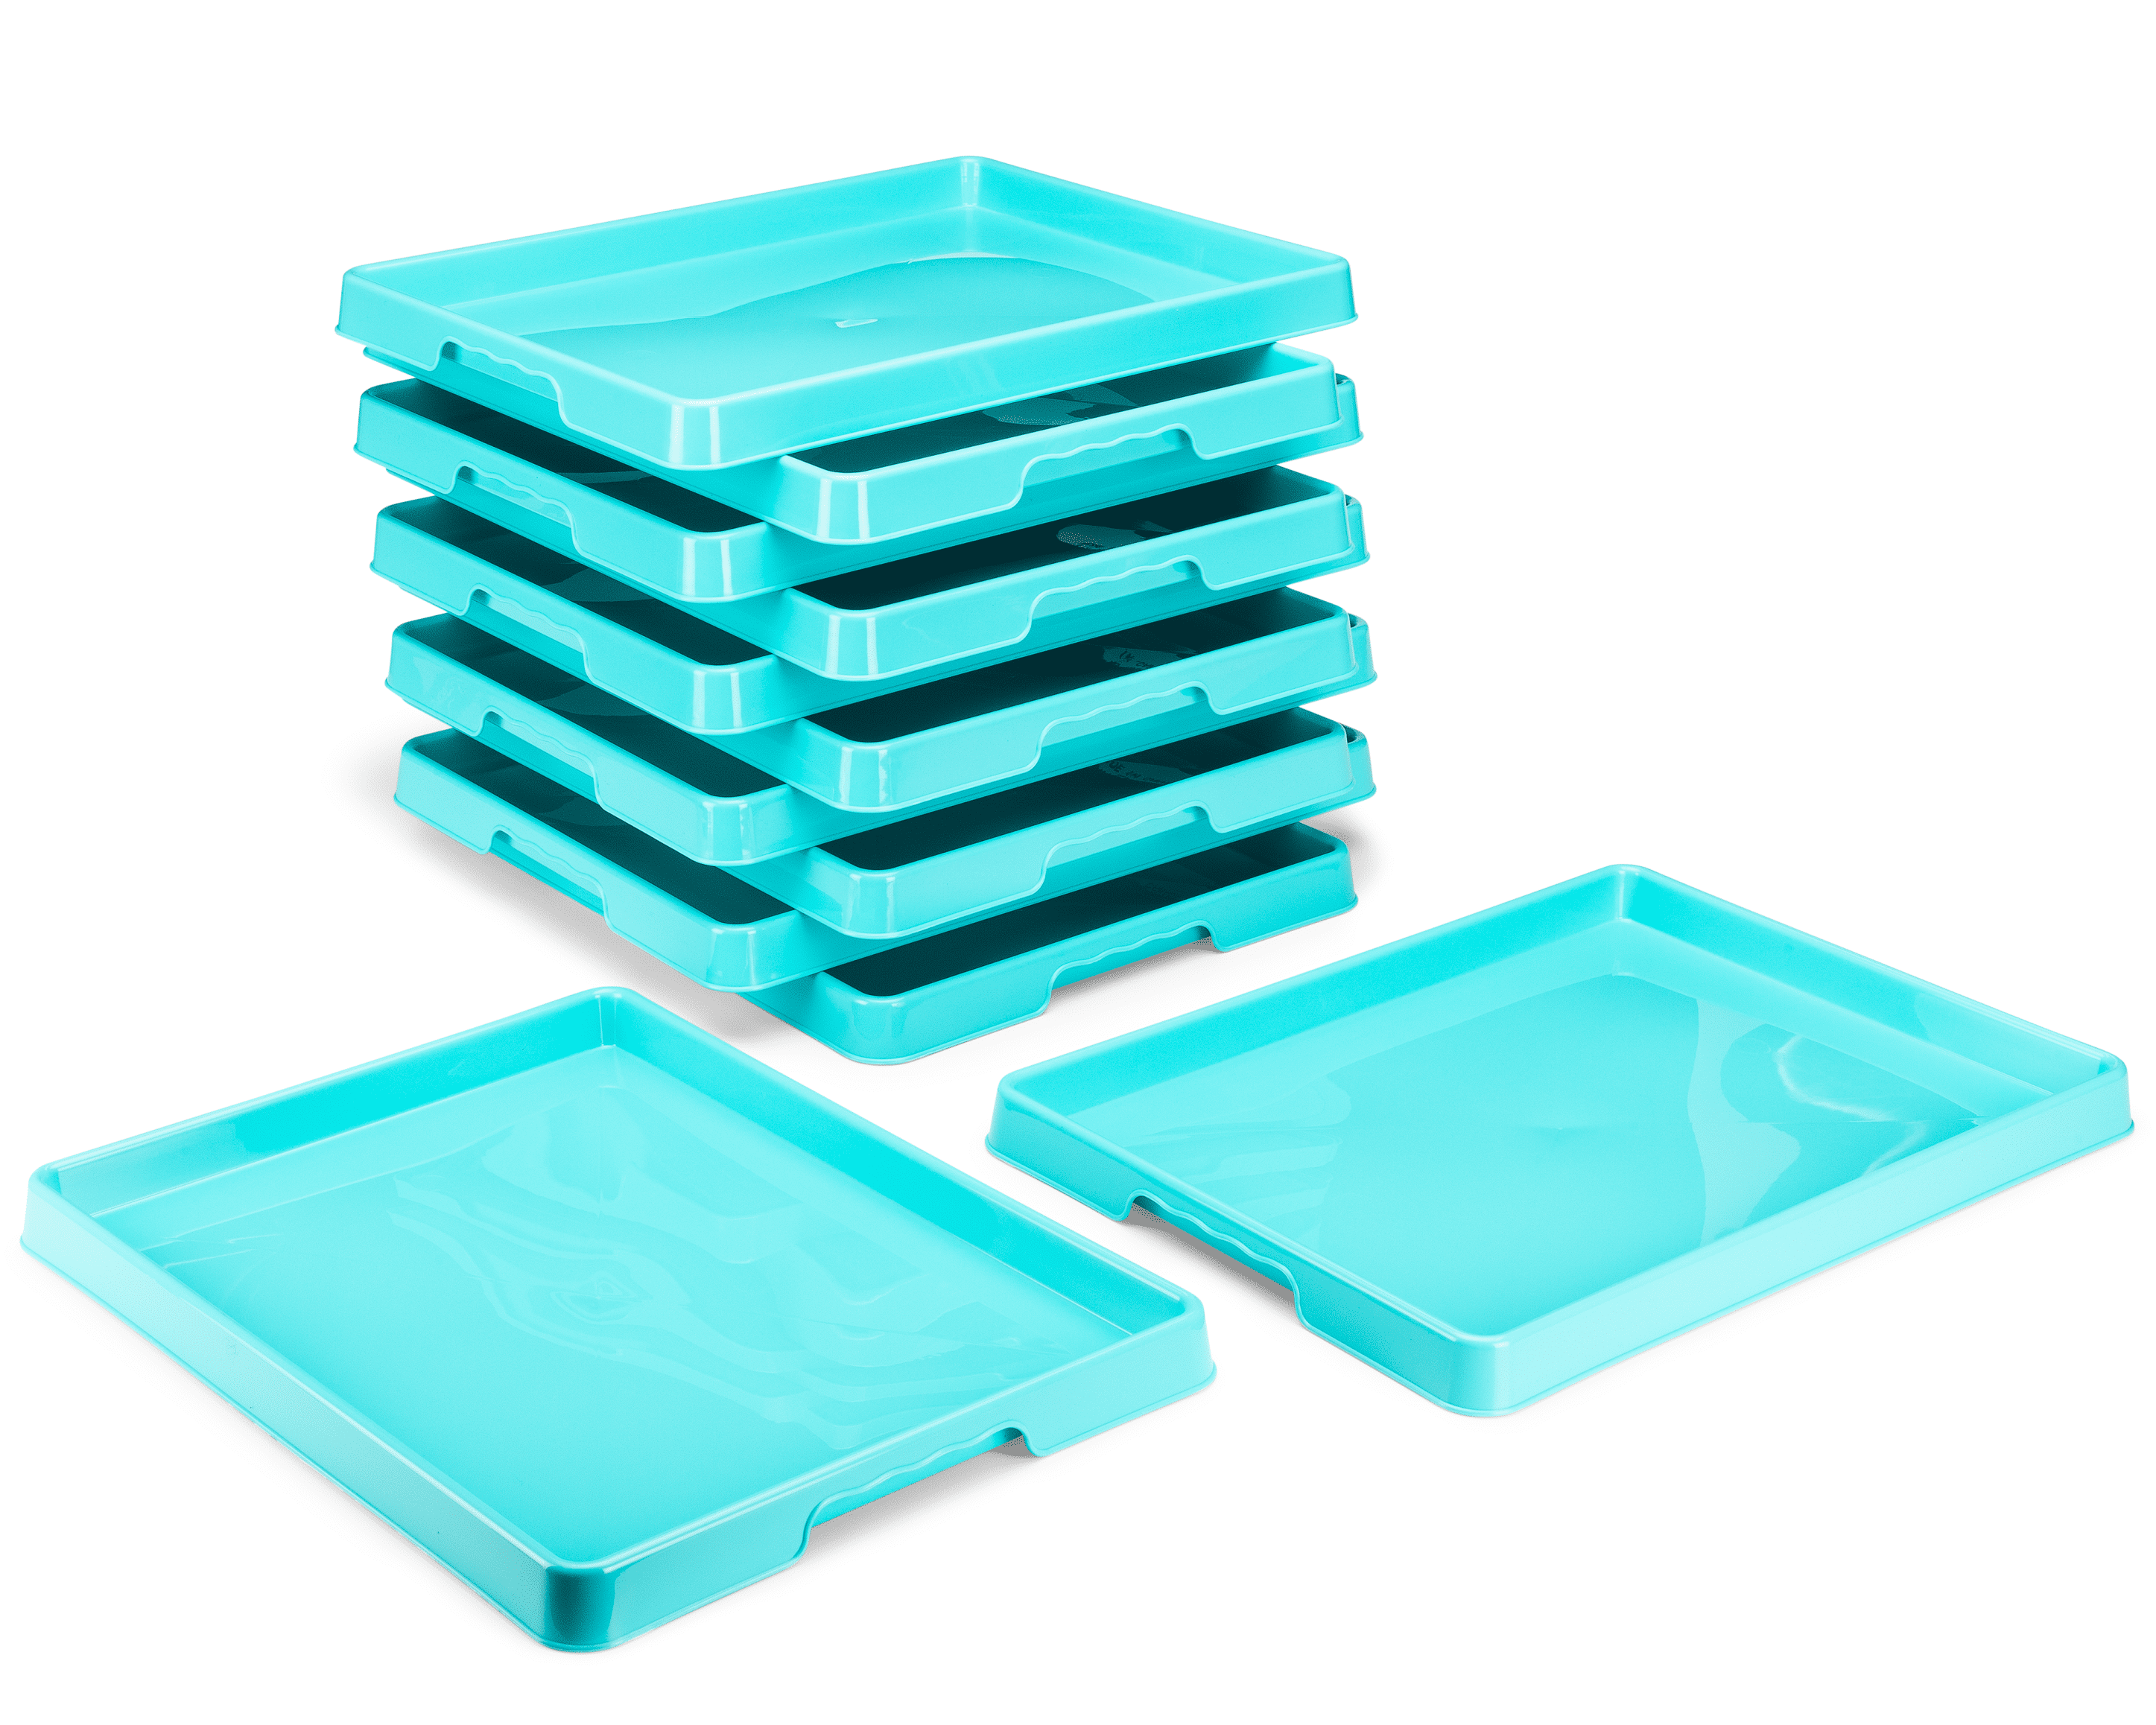 Storex Sorting and Crafts Tray, 12 x 16 Inches, Teal, 12-Pack, Blue